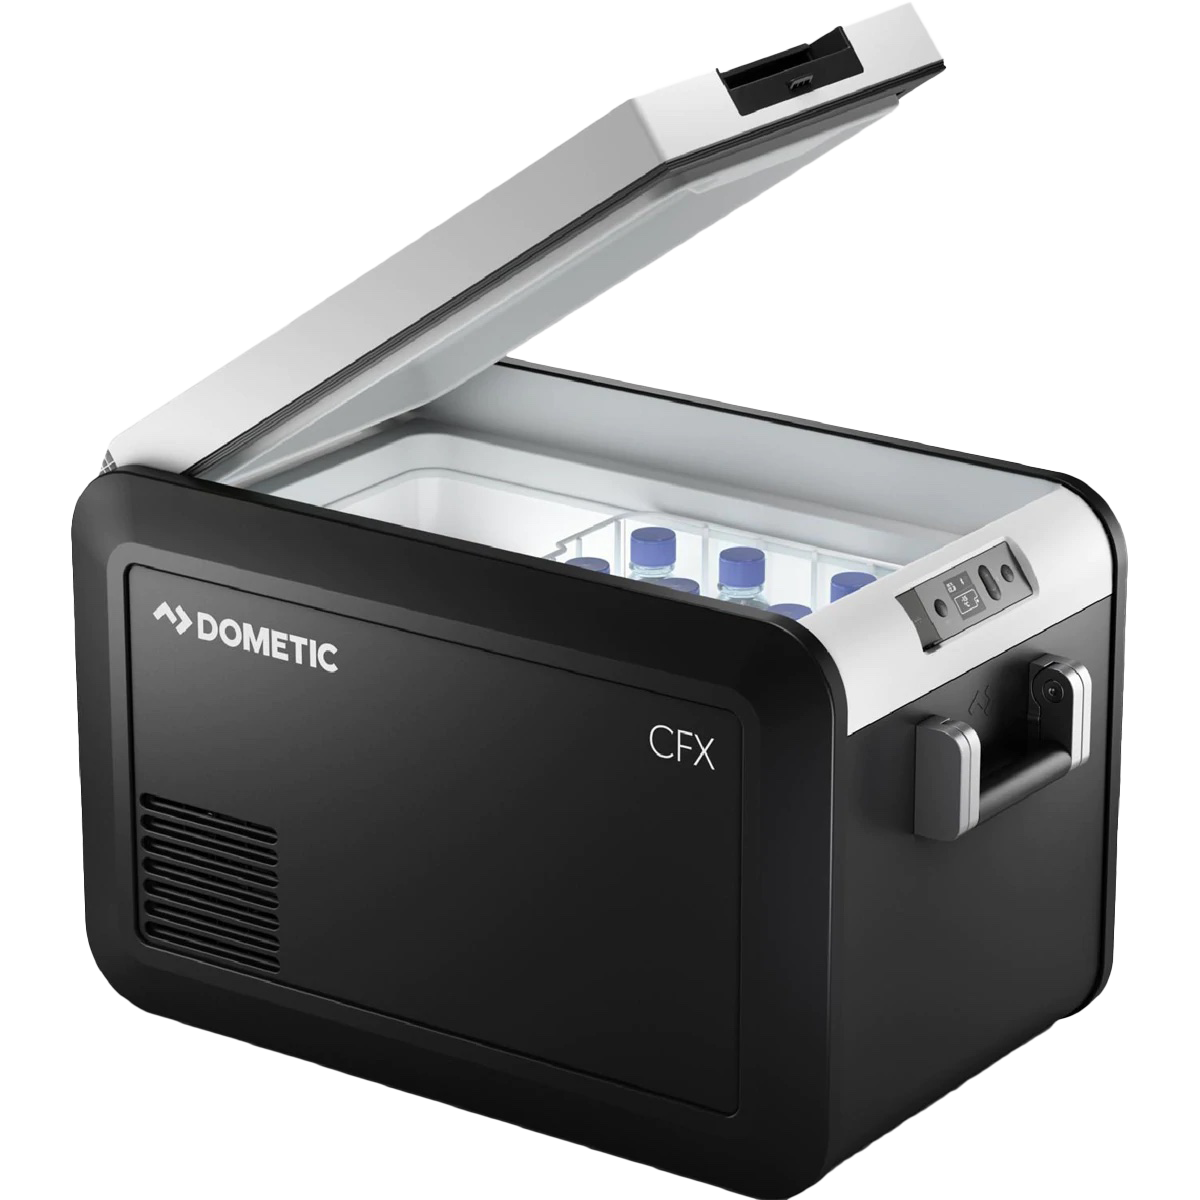 Dometic CFX3 35 Powered Cooler Demo alternate view